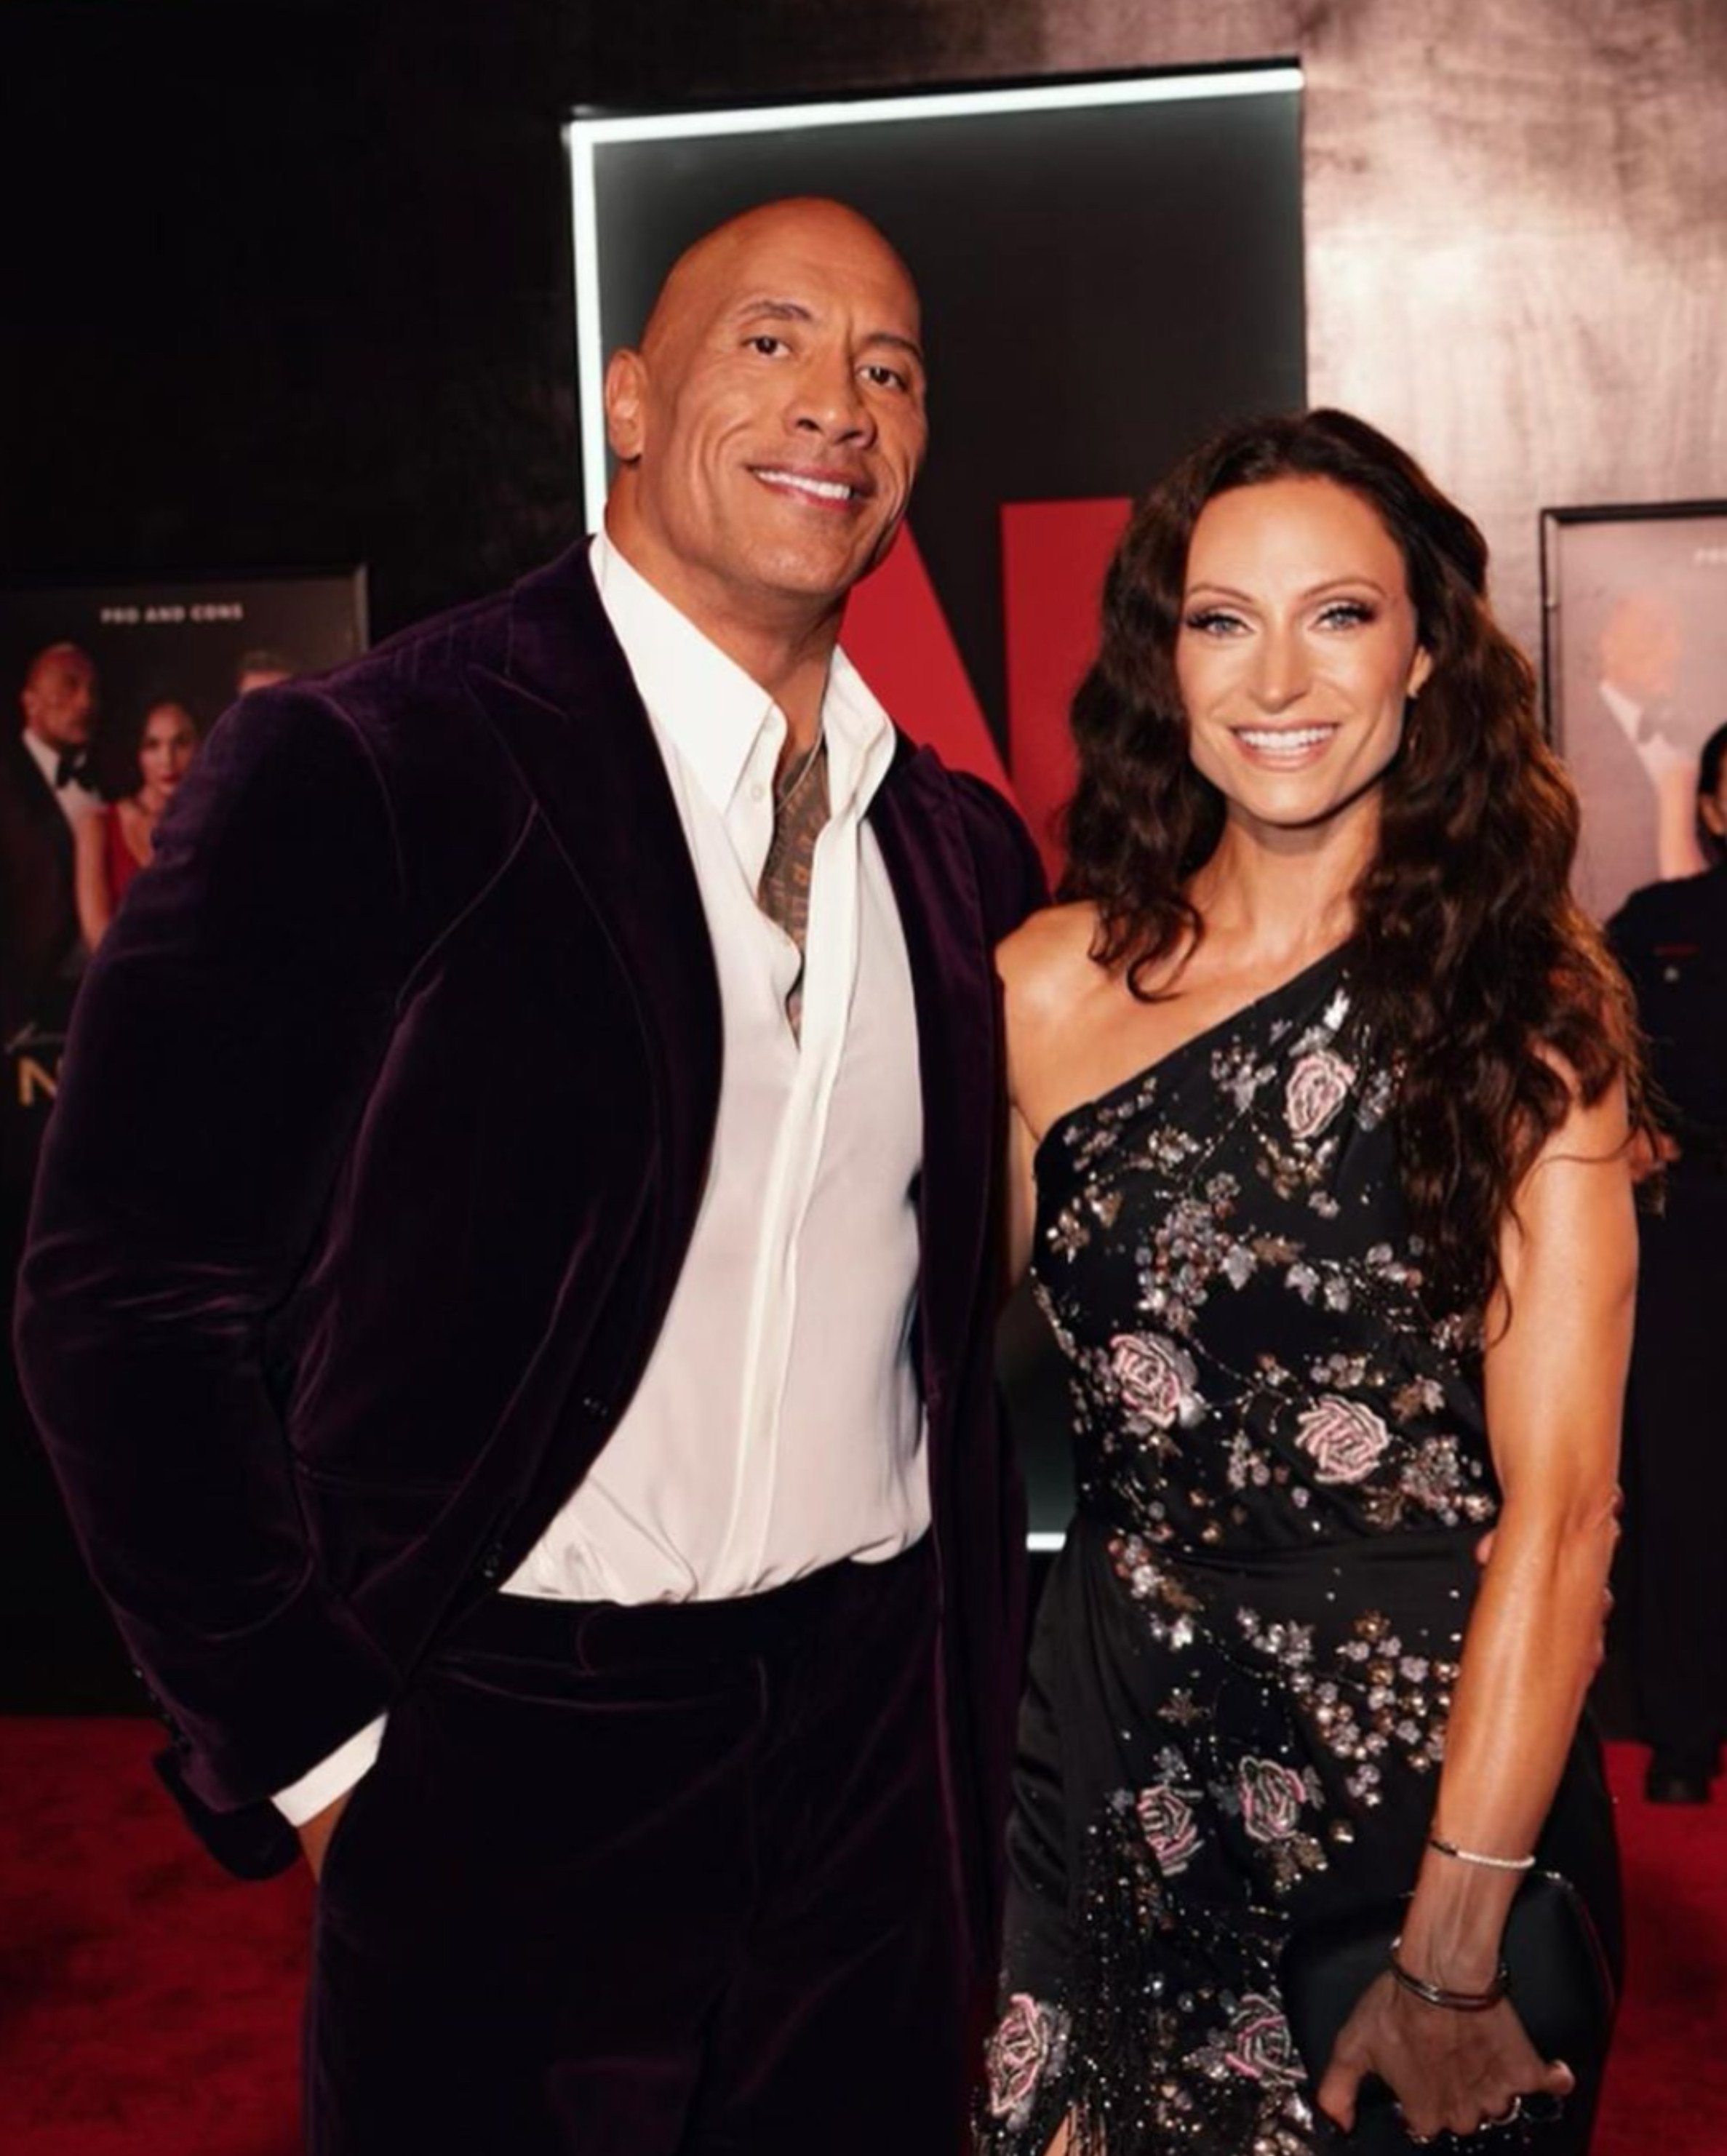 Dwayne “The Rock” Johnson and his wife Lauren Hashian at the actor’s Red Notice premiere in 2021. Photo: @laurenhashianofficial/Instagram 